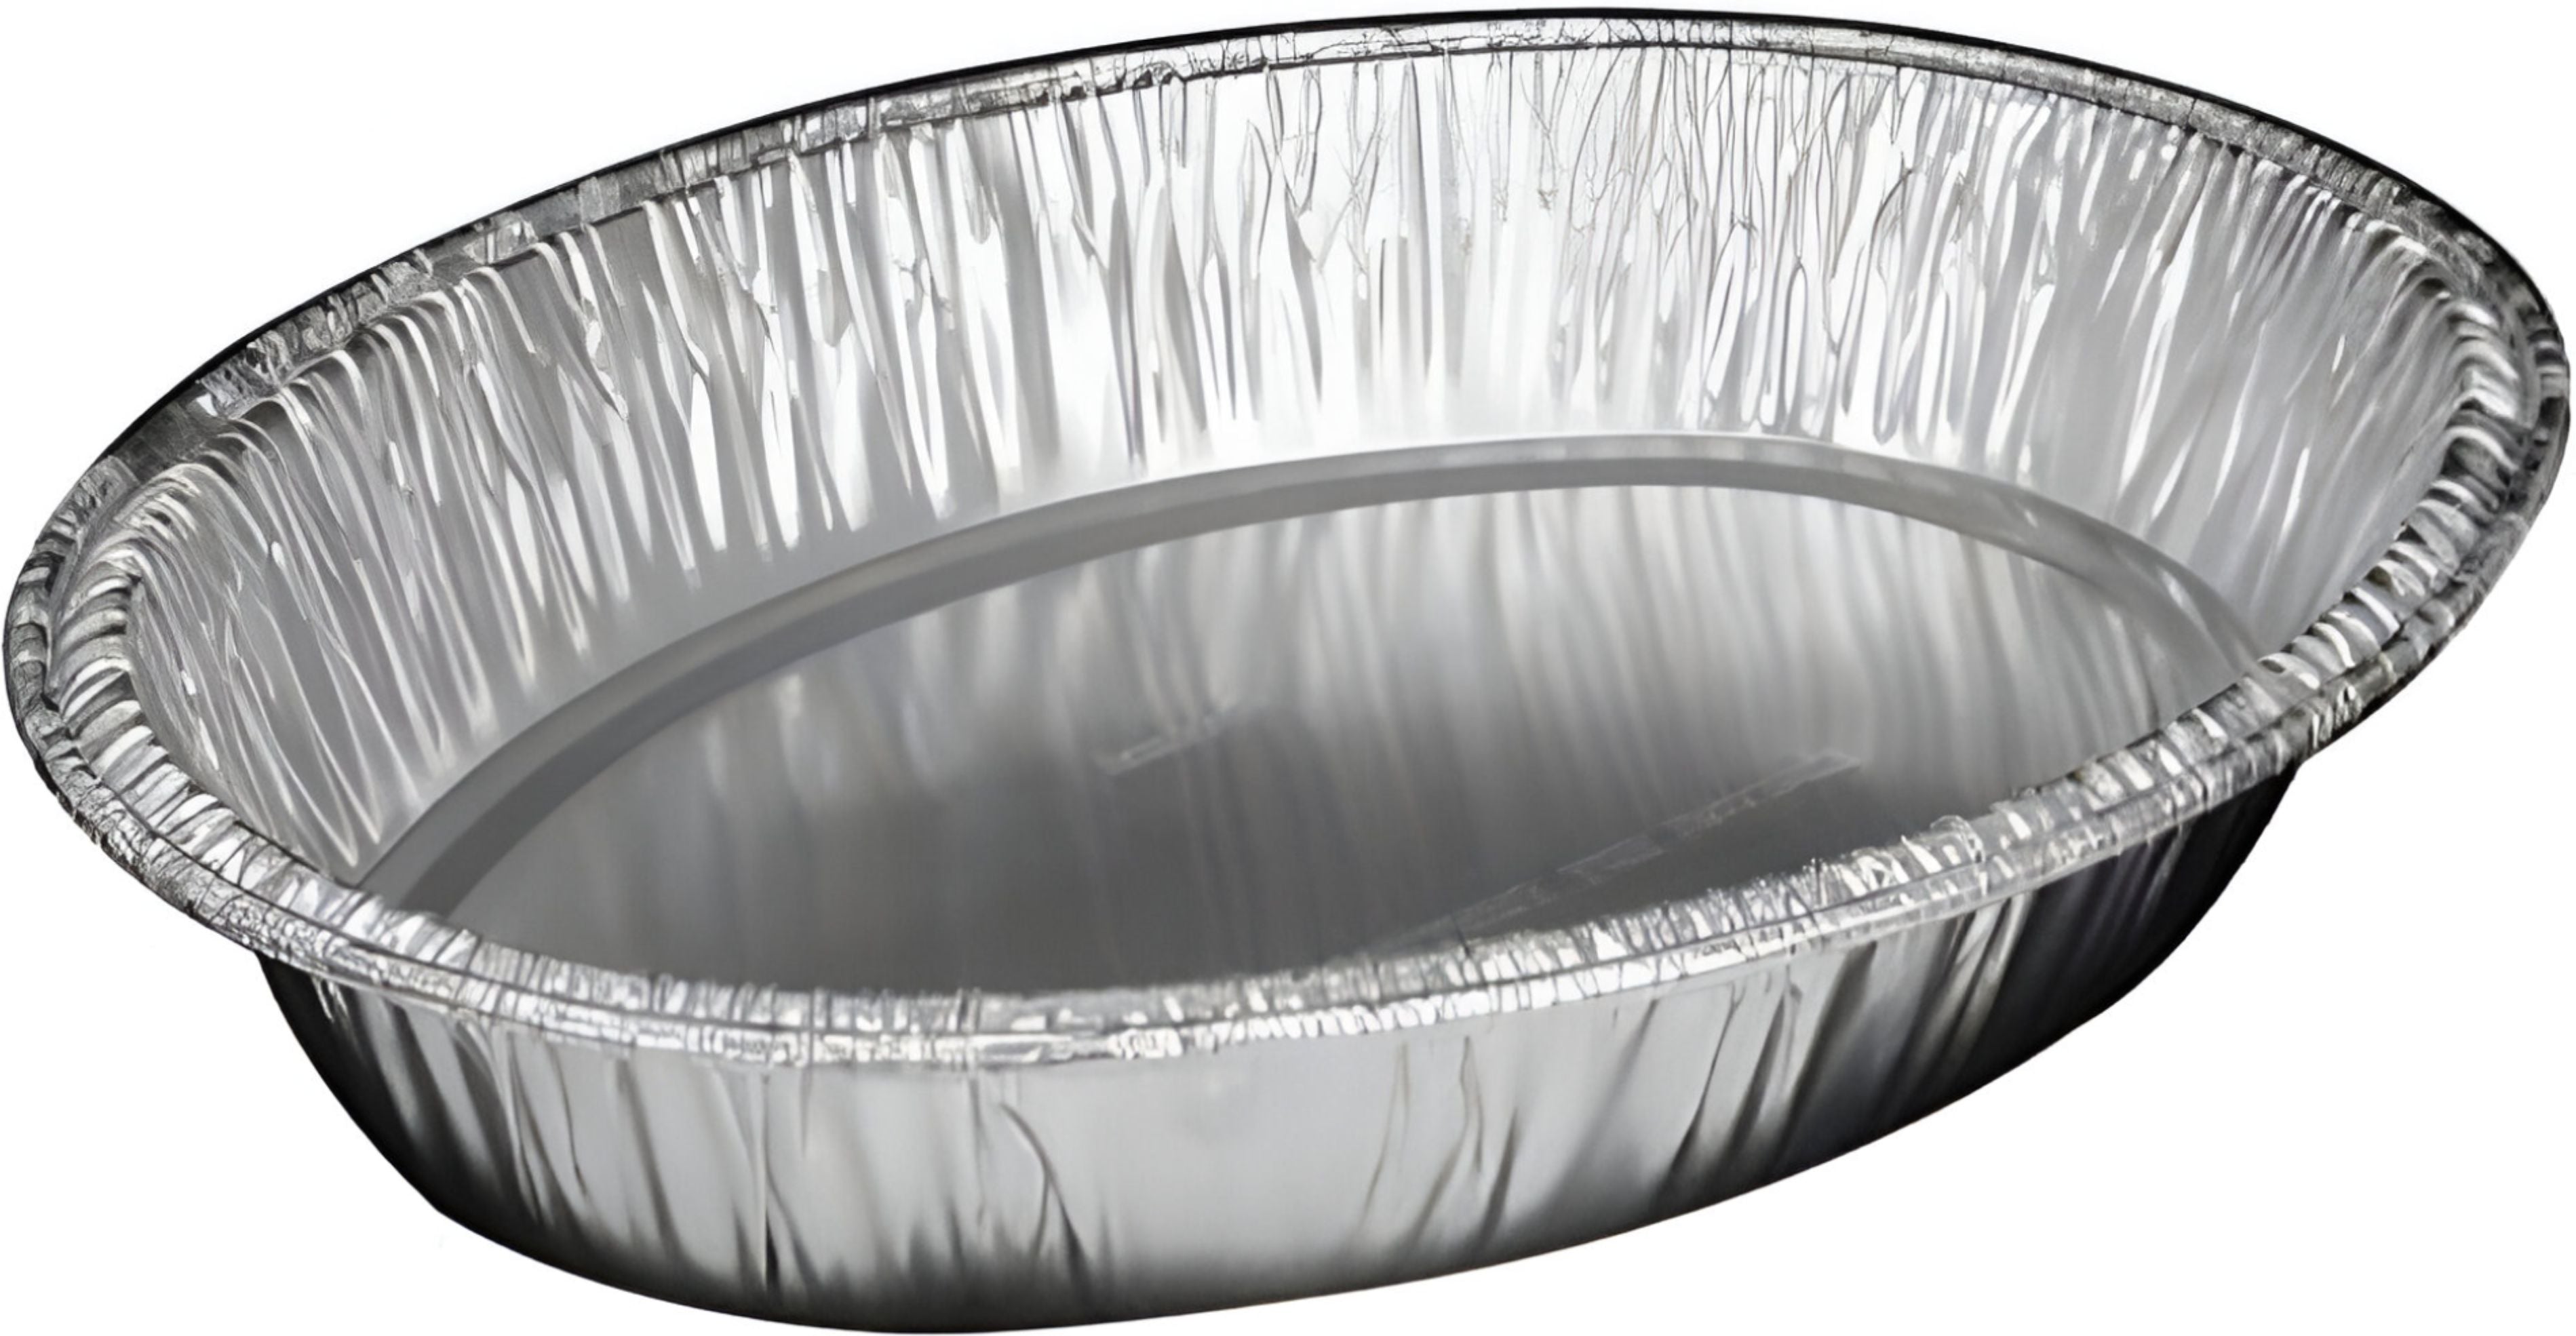 HFA - Small Oval Roaster Foil Containers, 50/Cs - 322-00-50